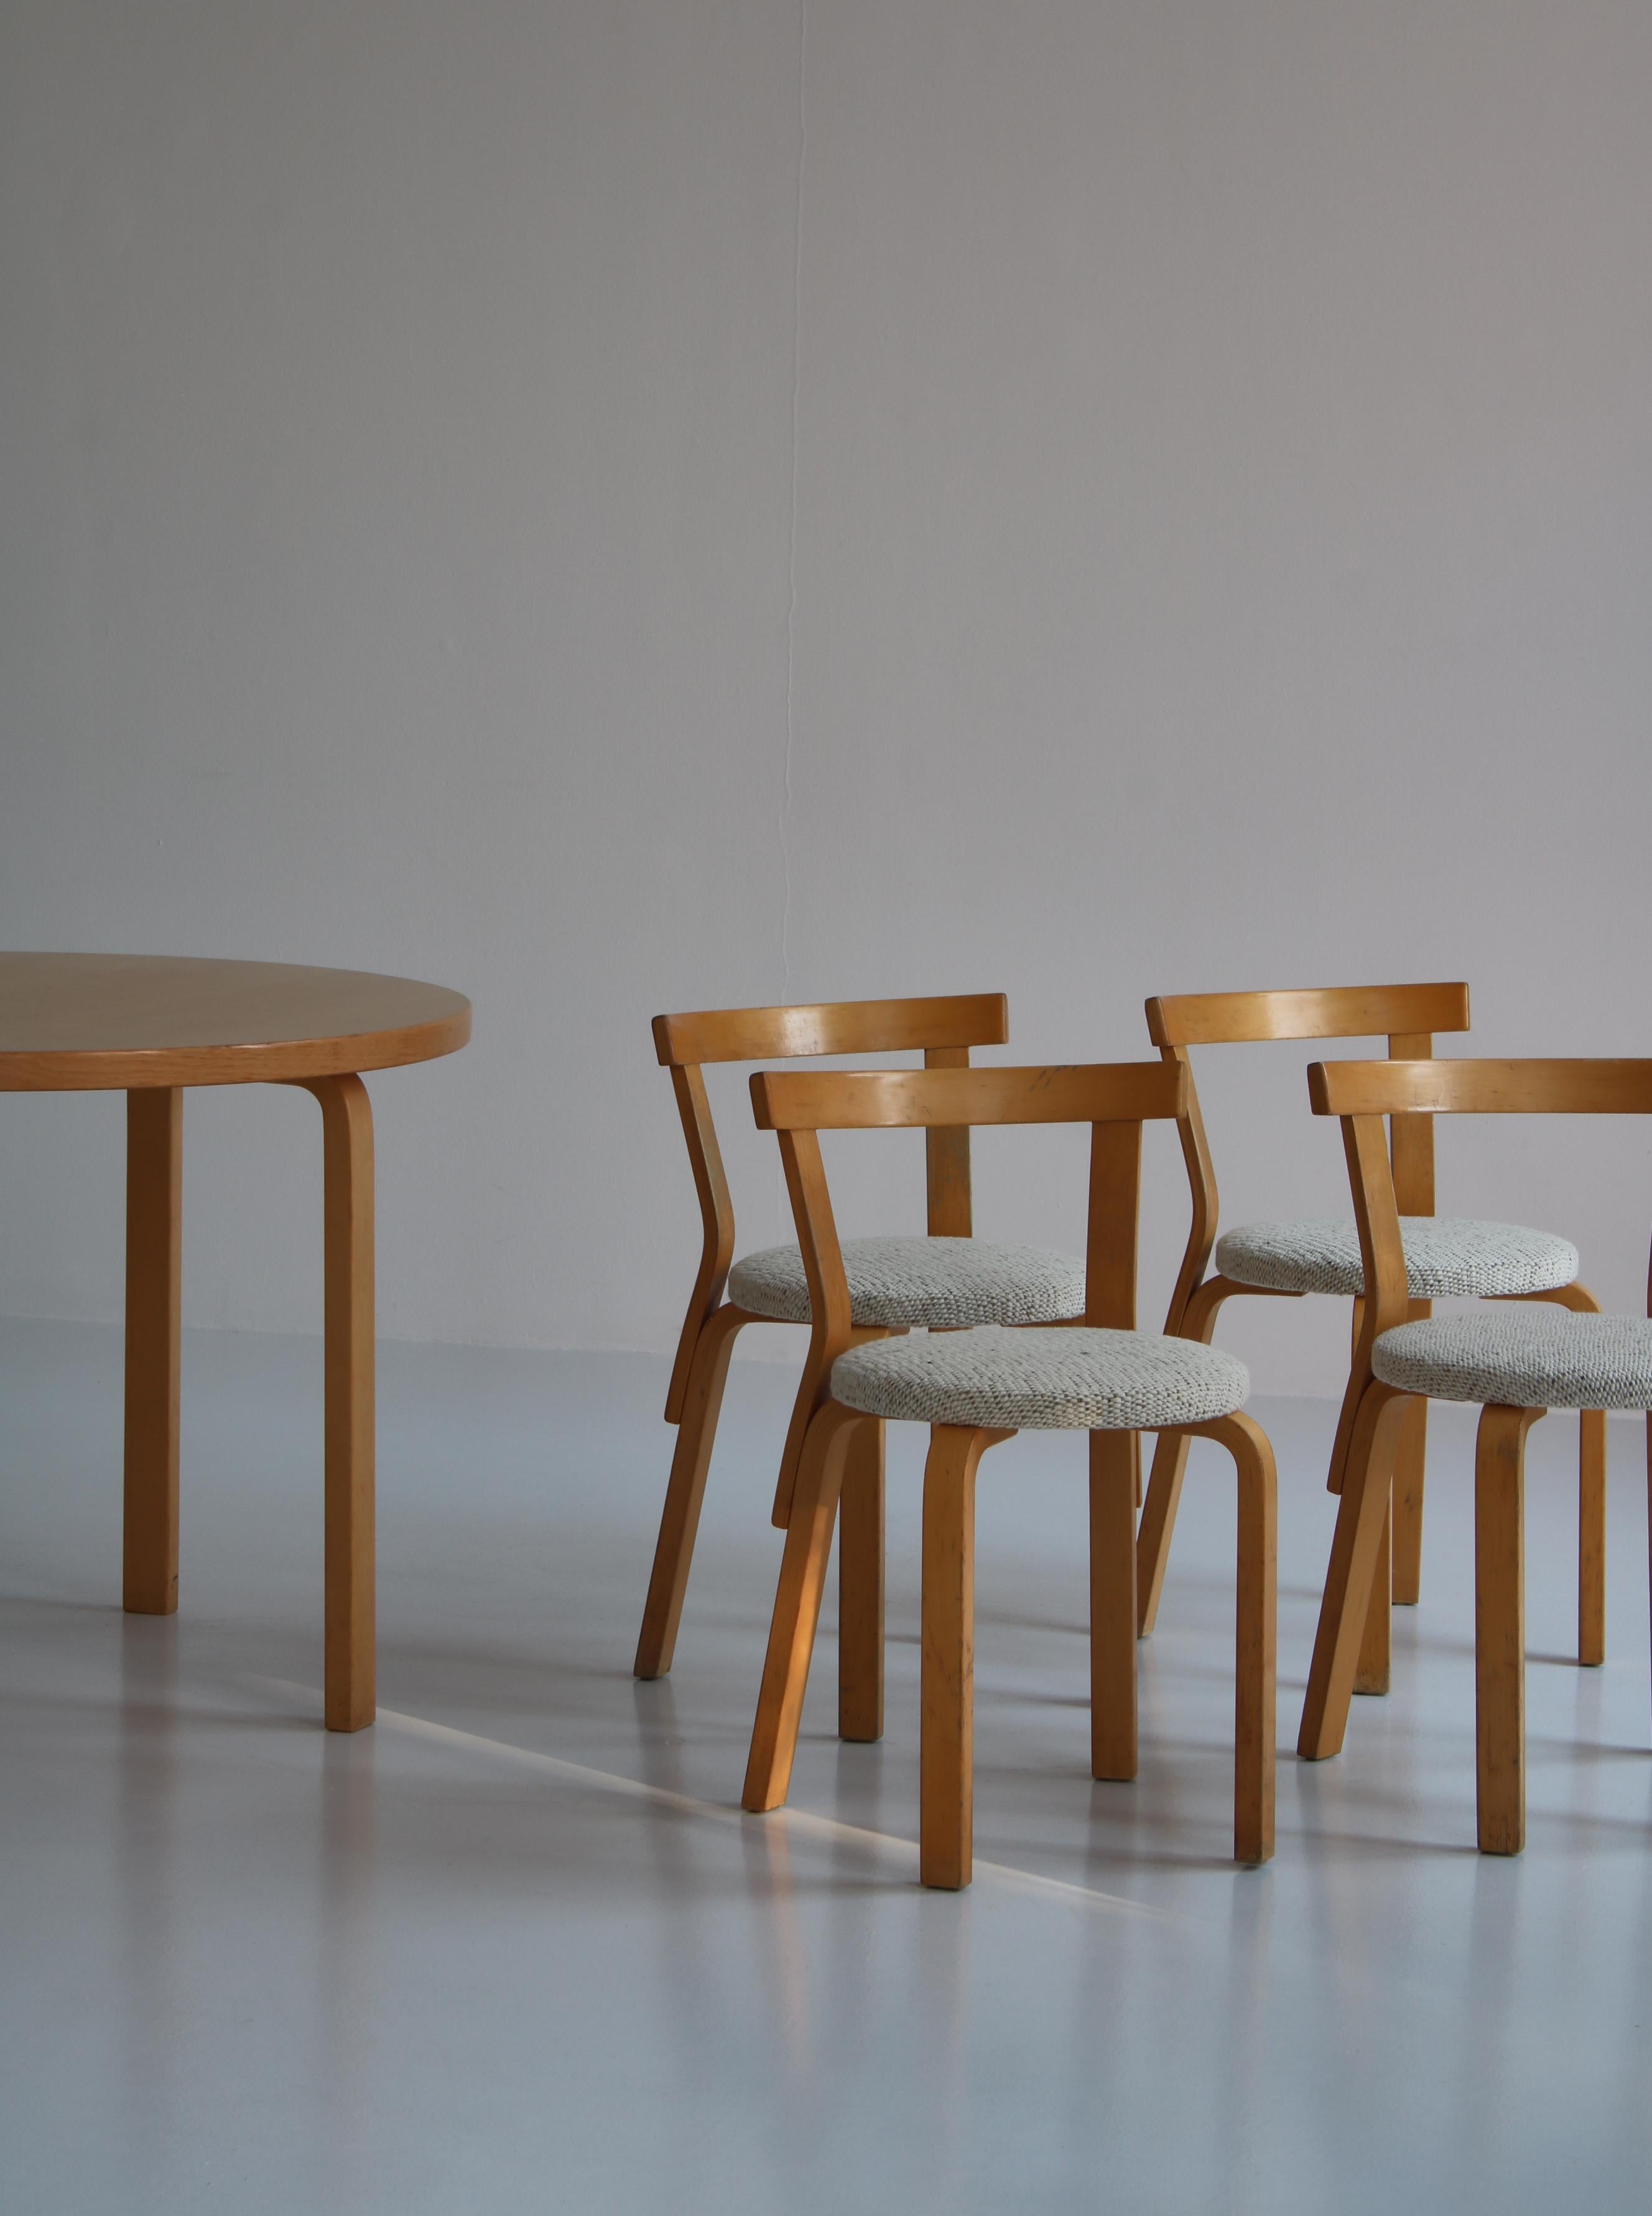 Set of 4 Alvar Aalto 4 dining chairs model 68 in birch. This set was made at Artek, Finland in the 1970s. The chairs have been reupholstered in 100% wool dessin McNutt from 